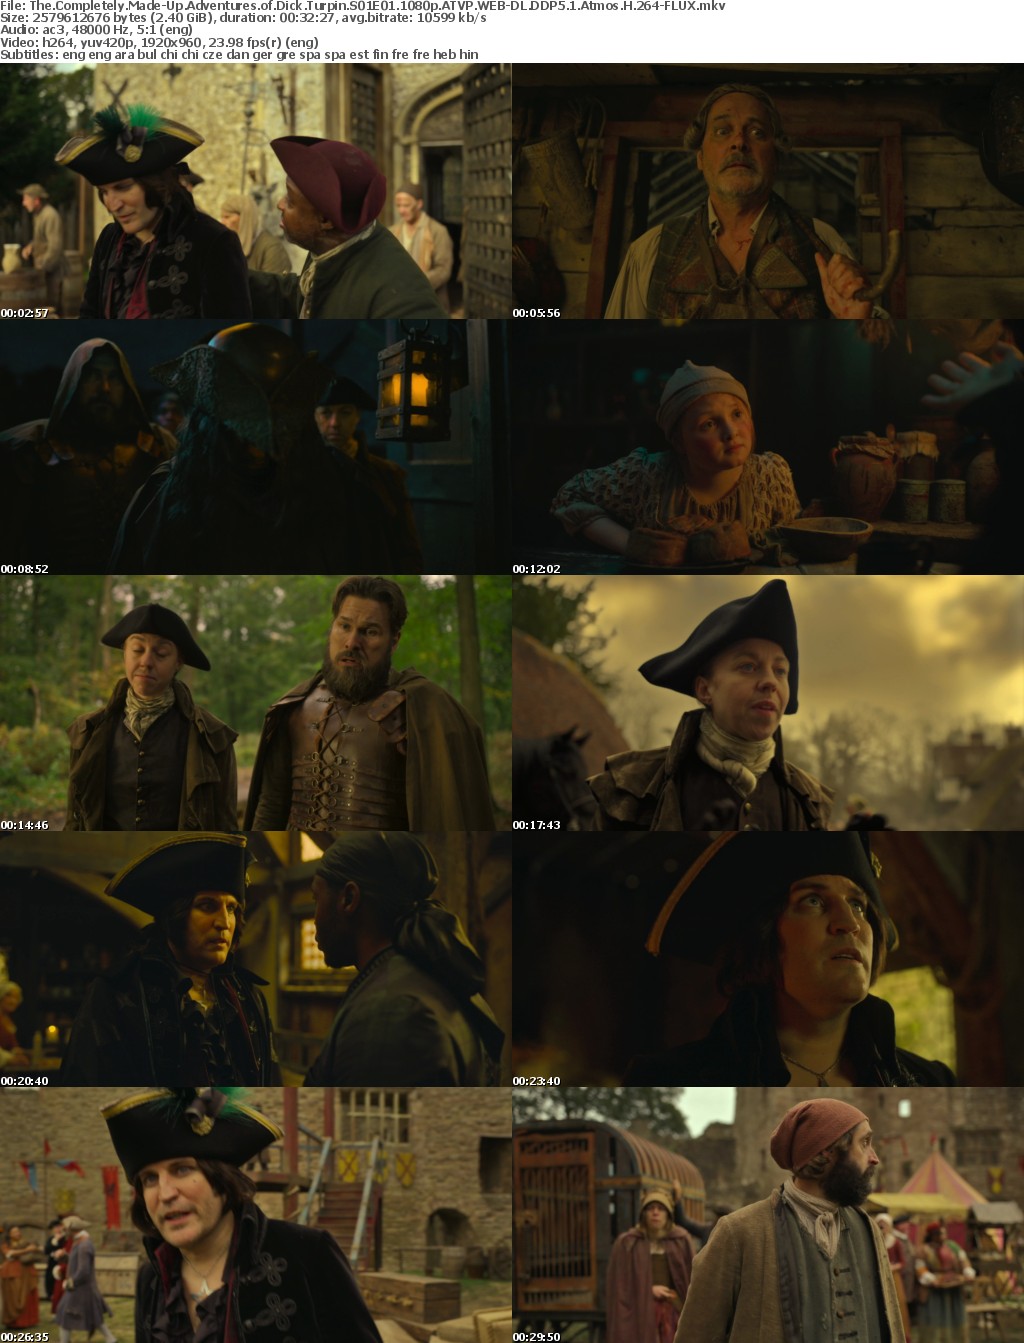 The Completely Made-Up Adventures of Dick Turpin S01E01 1080p ATVP WEB-DL DDP5 1 Atmos H 264-FLUX